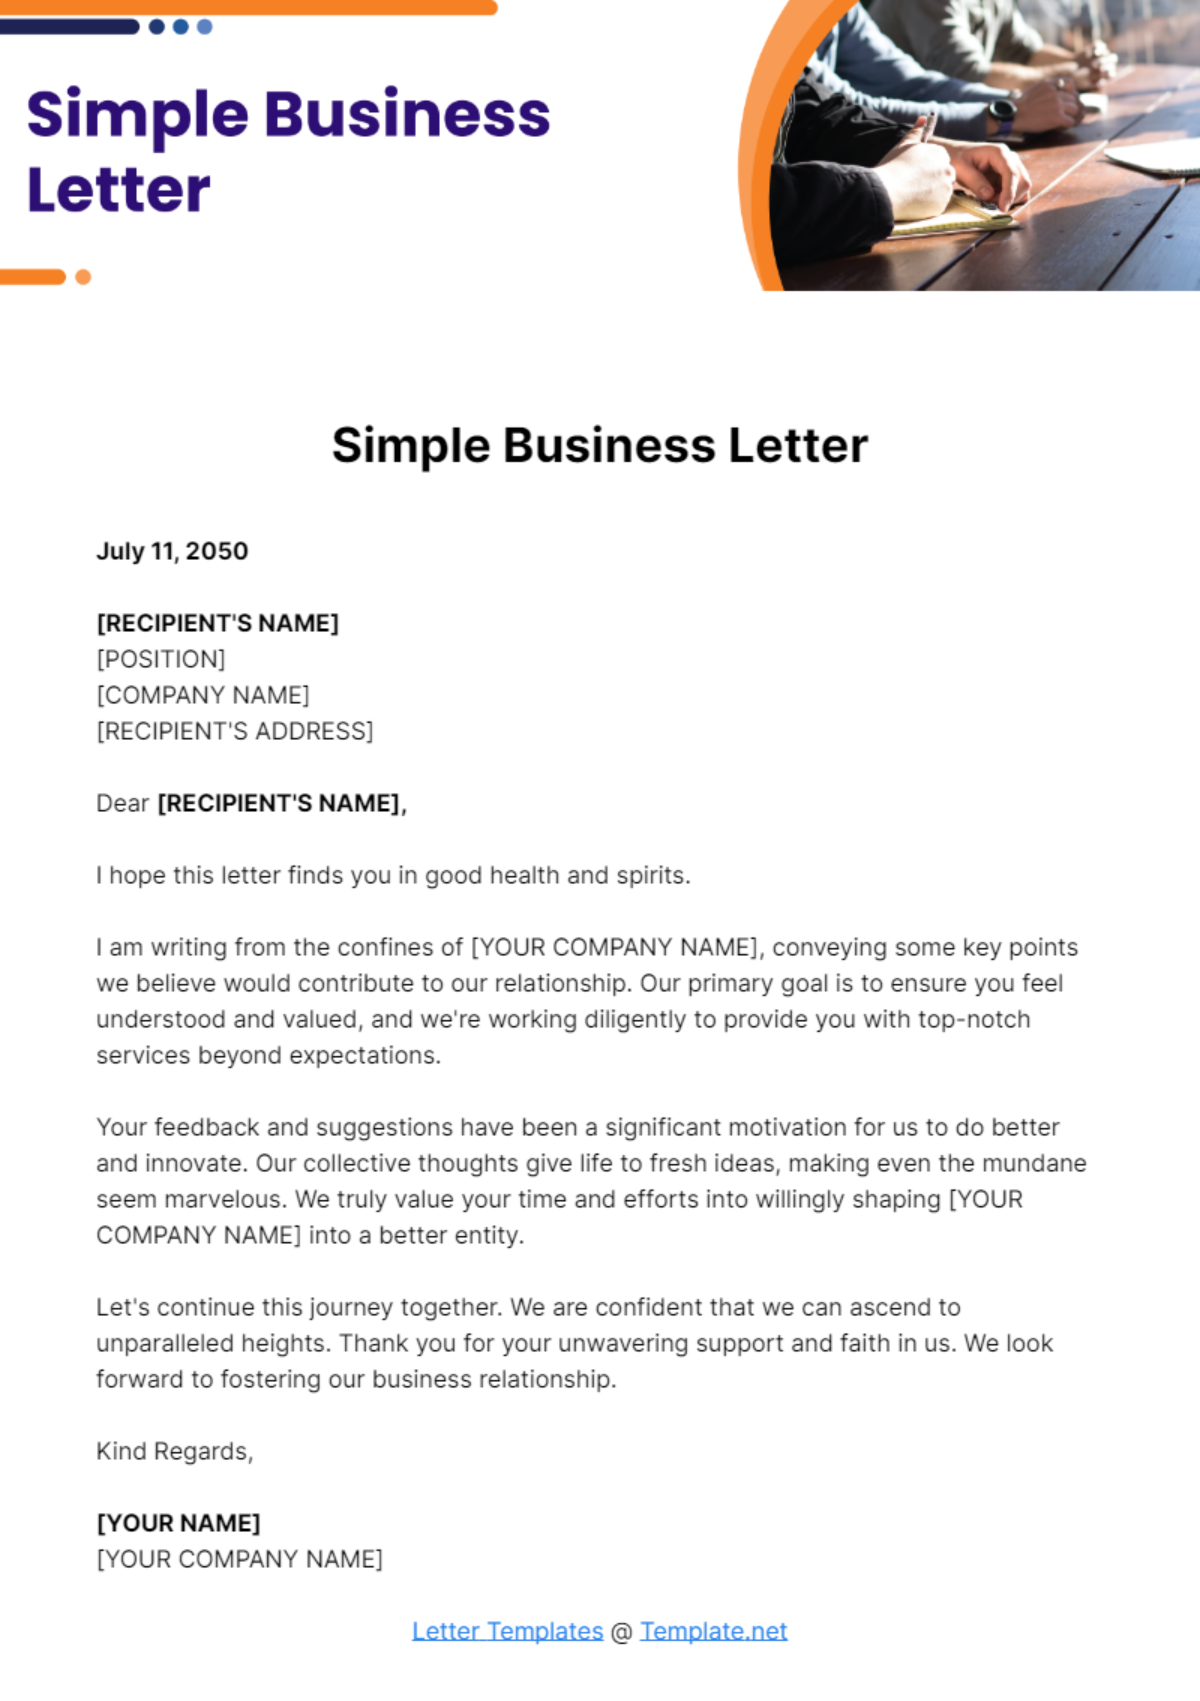 Free Simple Business Letter Template